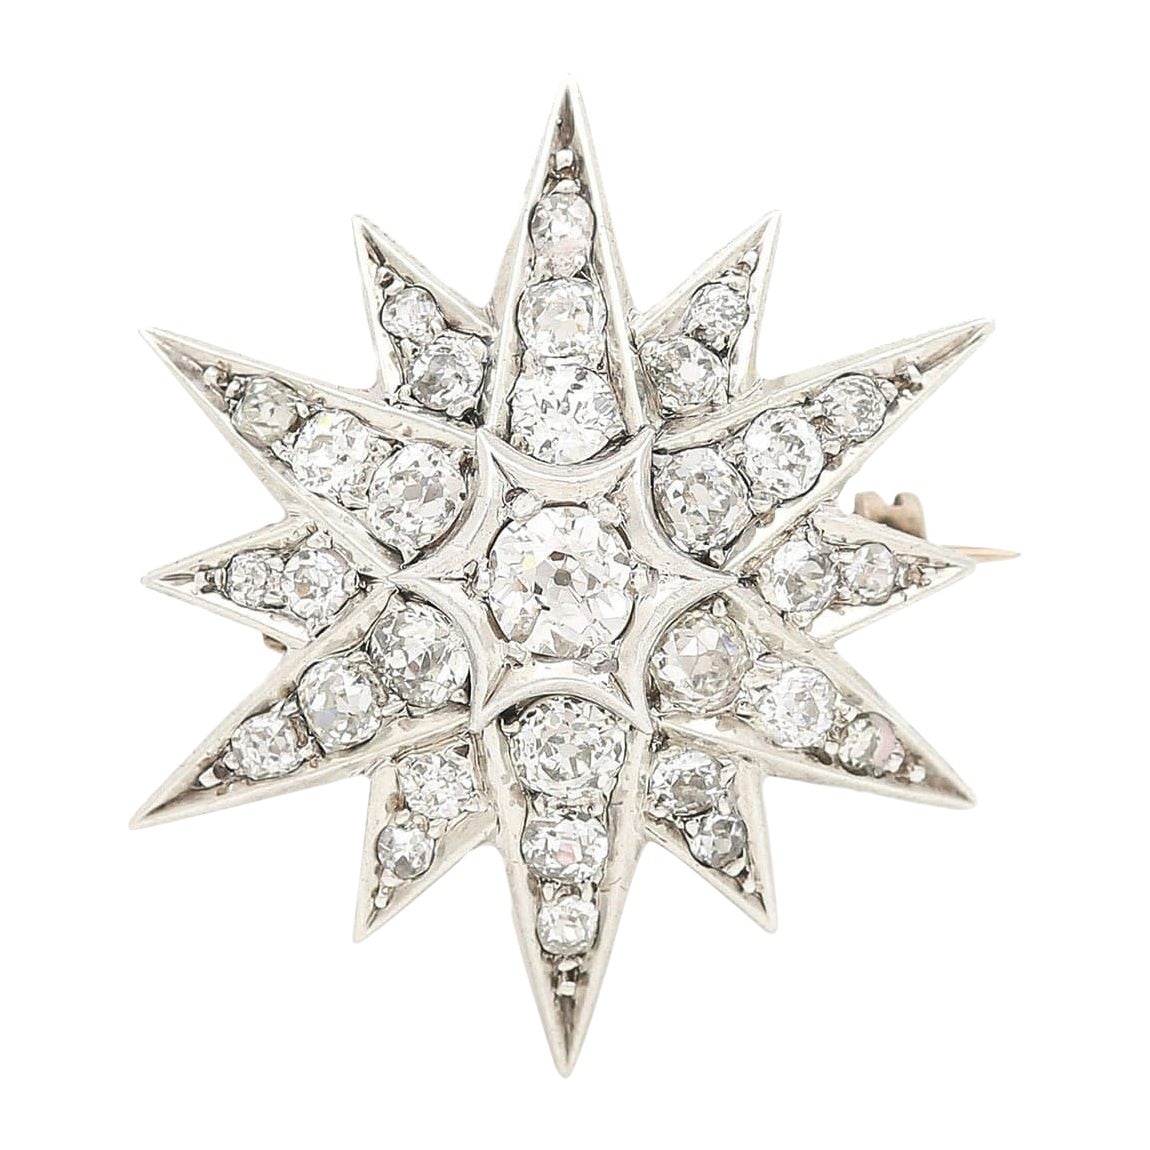 Victorian 1.50ct Old Mine Cut Diamond Star Brooch and Pendant, circa 1880 For Sale